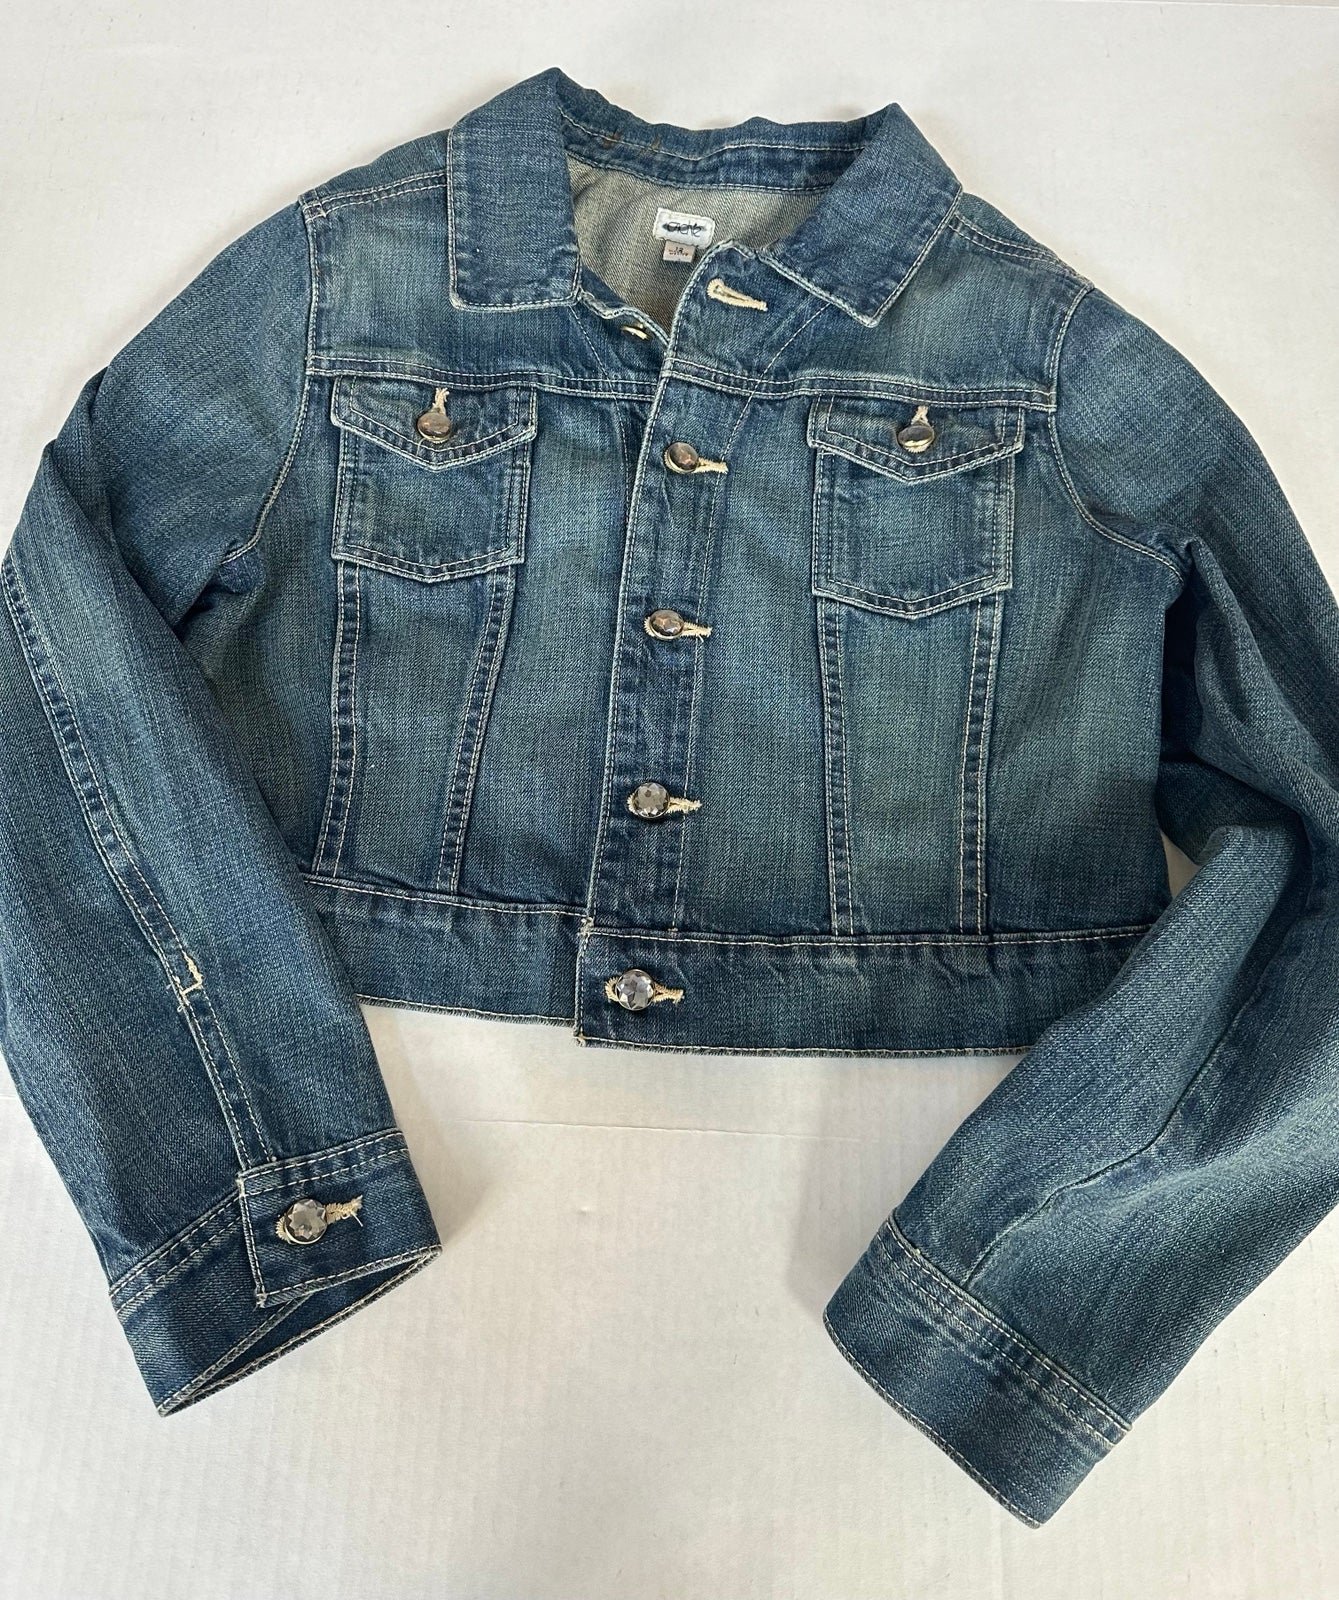 Exclusive Women’s Size 12 - Cache Denim Crop Jacket with Jeweled Buttons - Pre-Owned Ms6MvA1VB Novel 